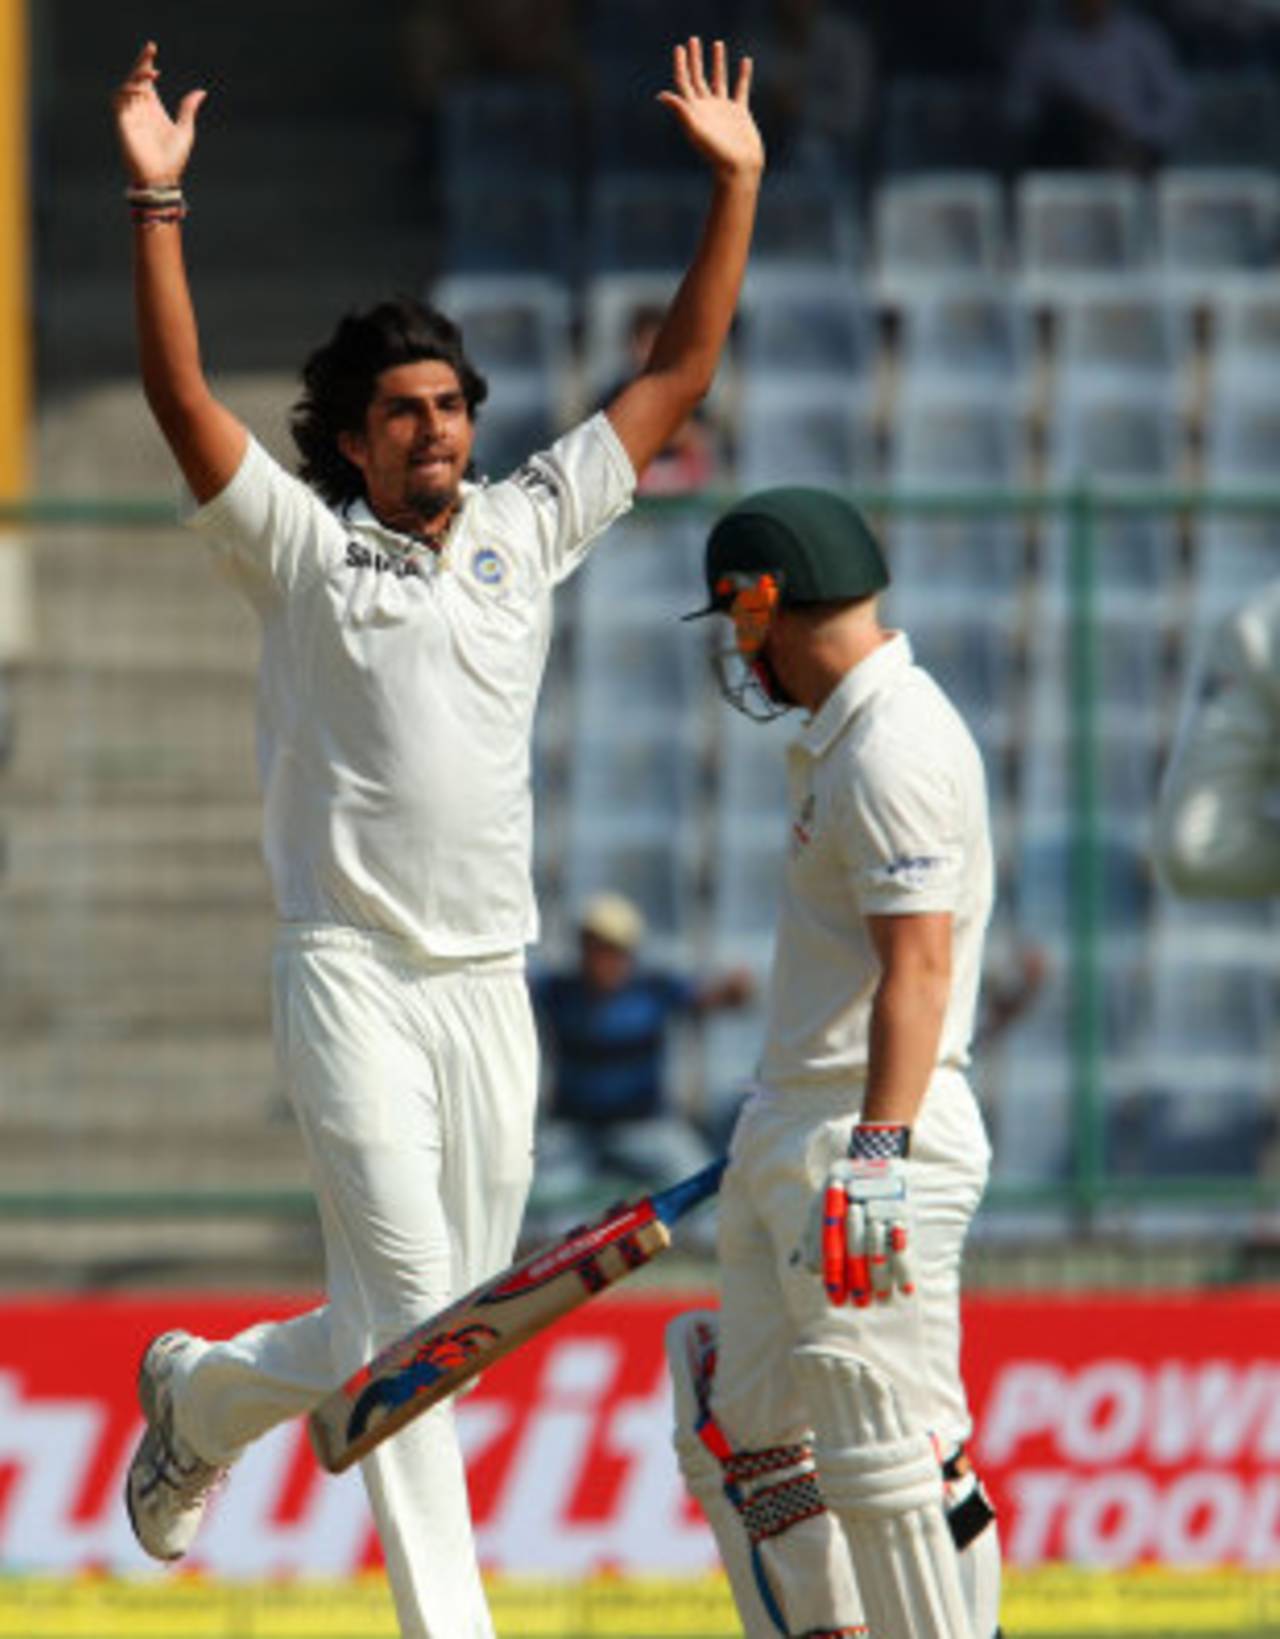 [File photo] Ishant Sharma's immediate response after dismissing James Pattinson on the third day has resulted in him being fined&nbsp;&nbsp;&bull;&nbsp;&nbsp;BCCI